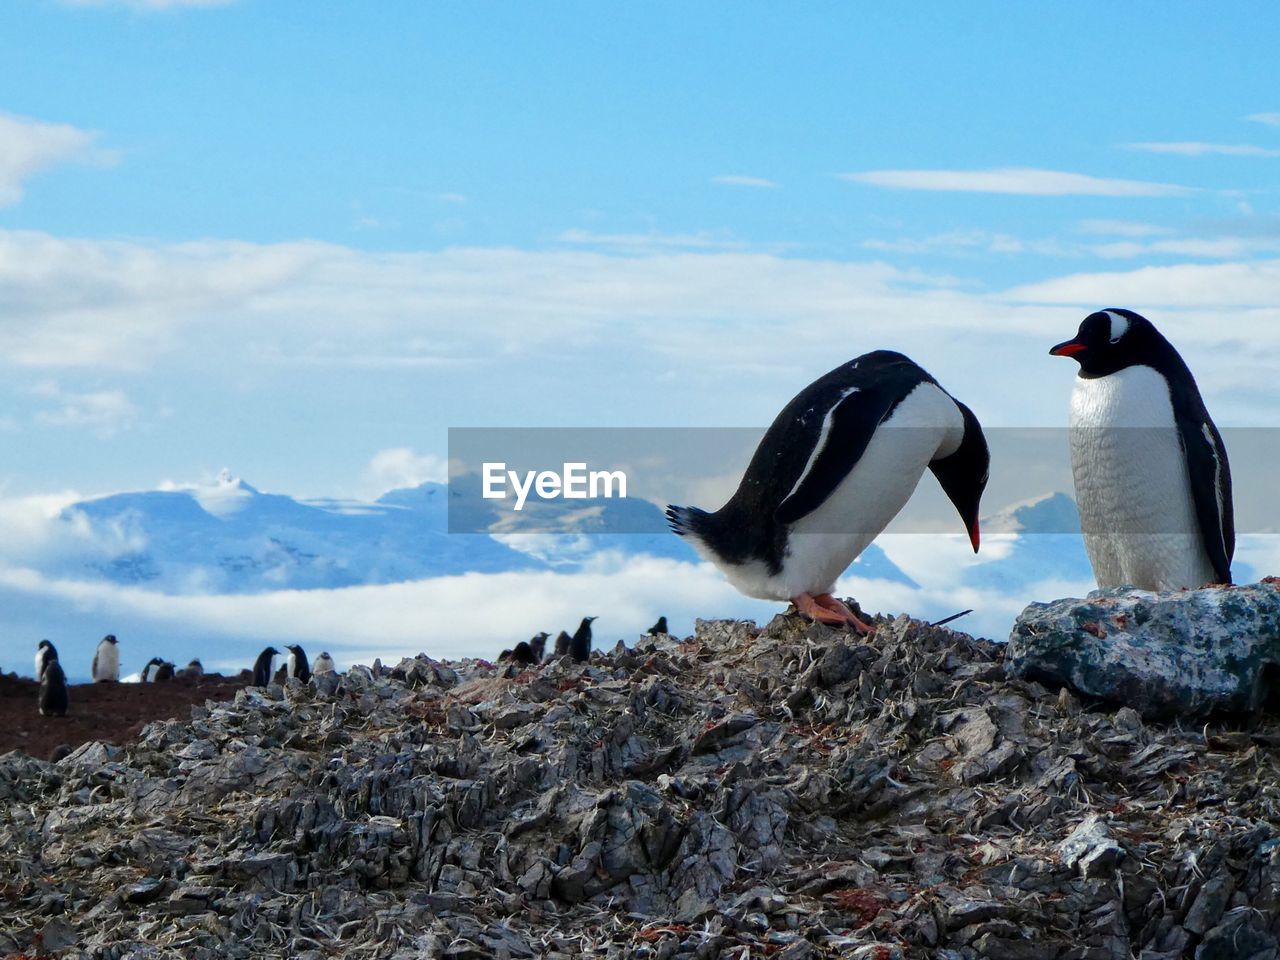 Gentoo penguins on rock with mountains in antarctica